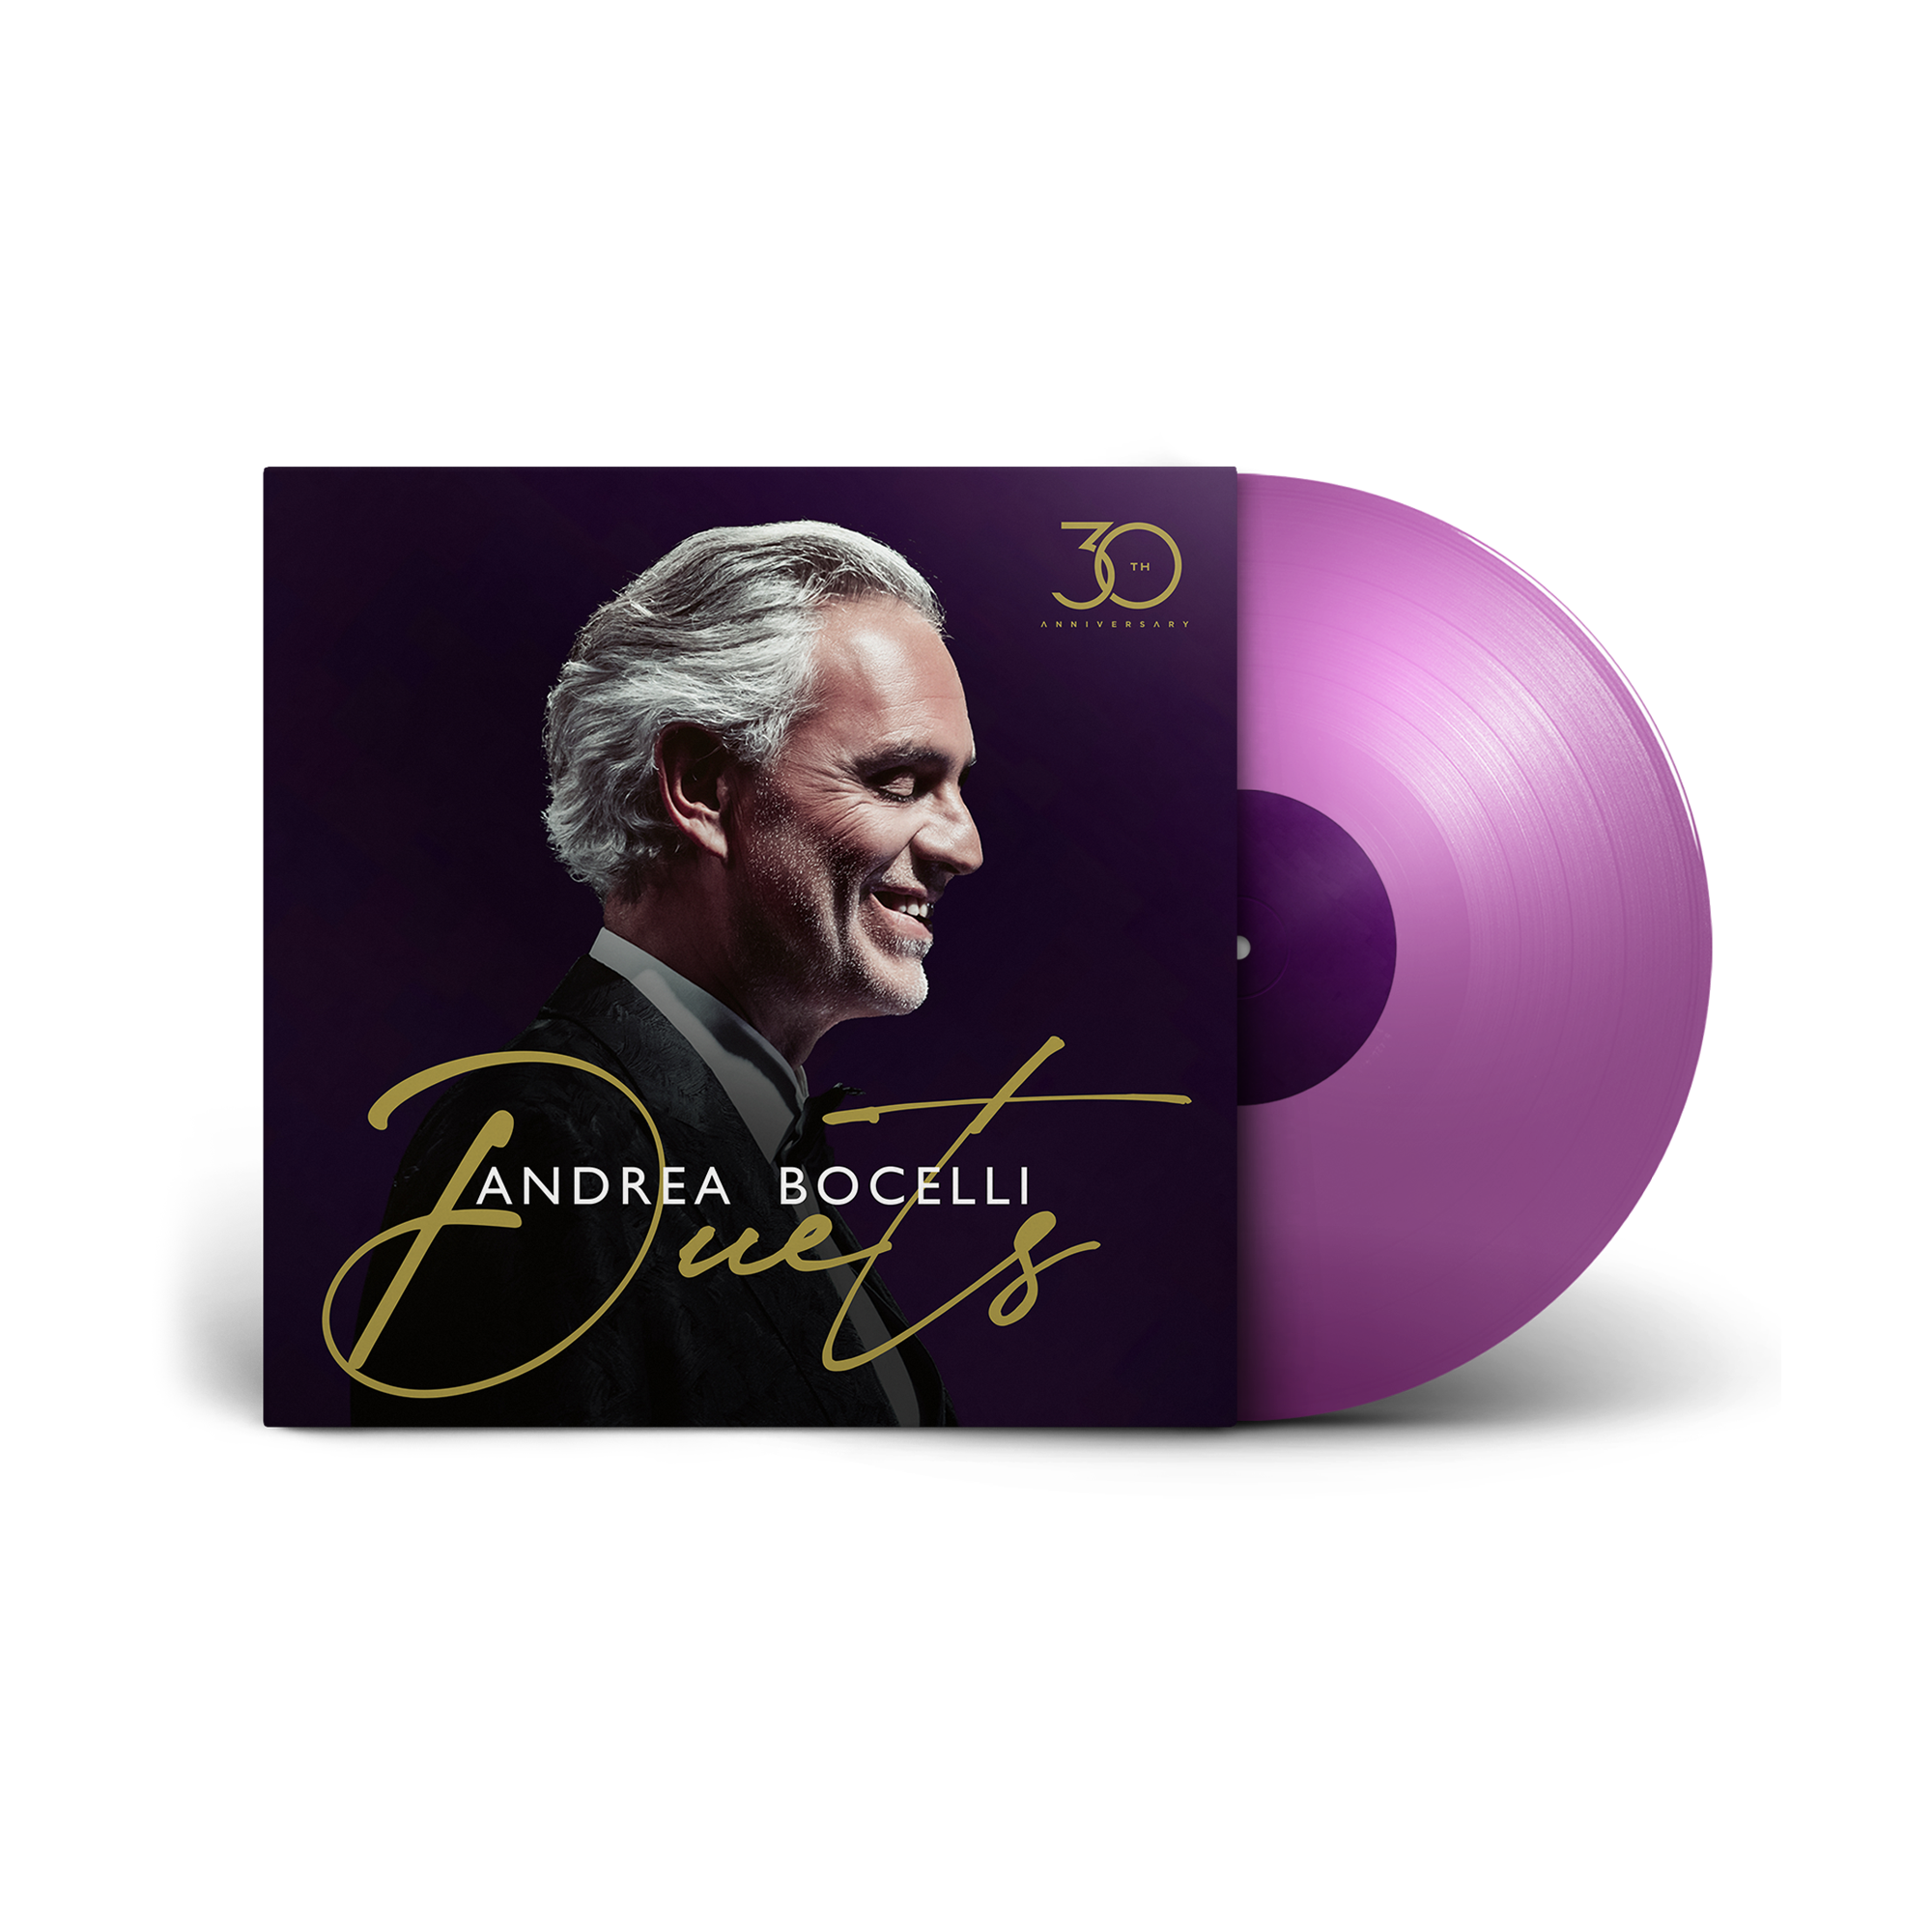 Andrea Bocelli - The Duets - 30th Anniversary - Vinyle violet exclusif